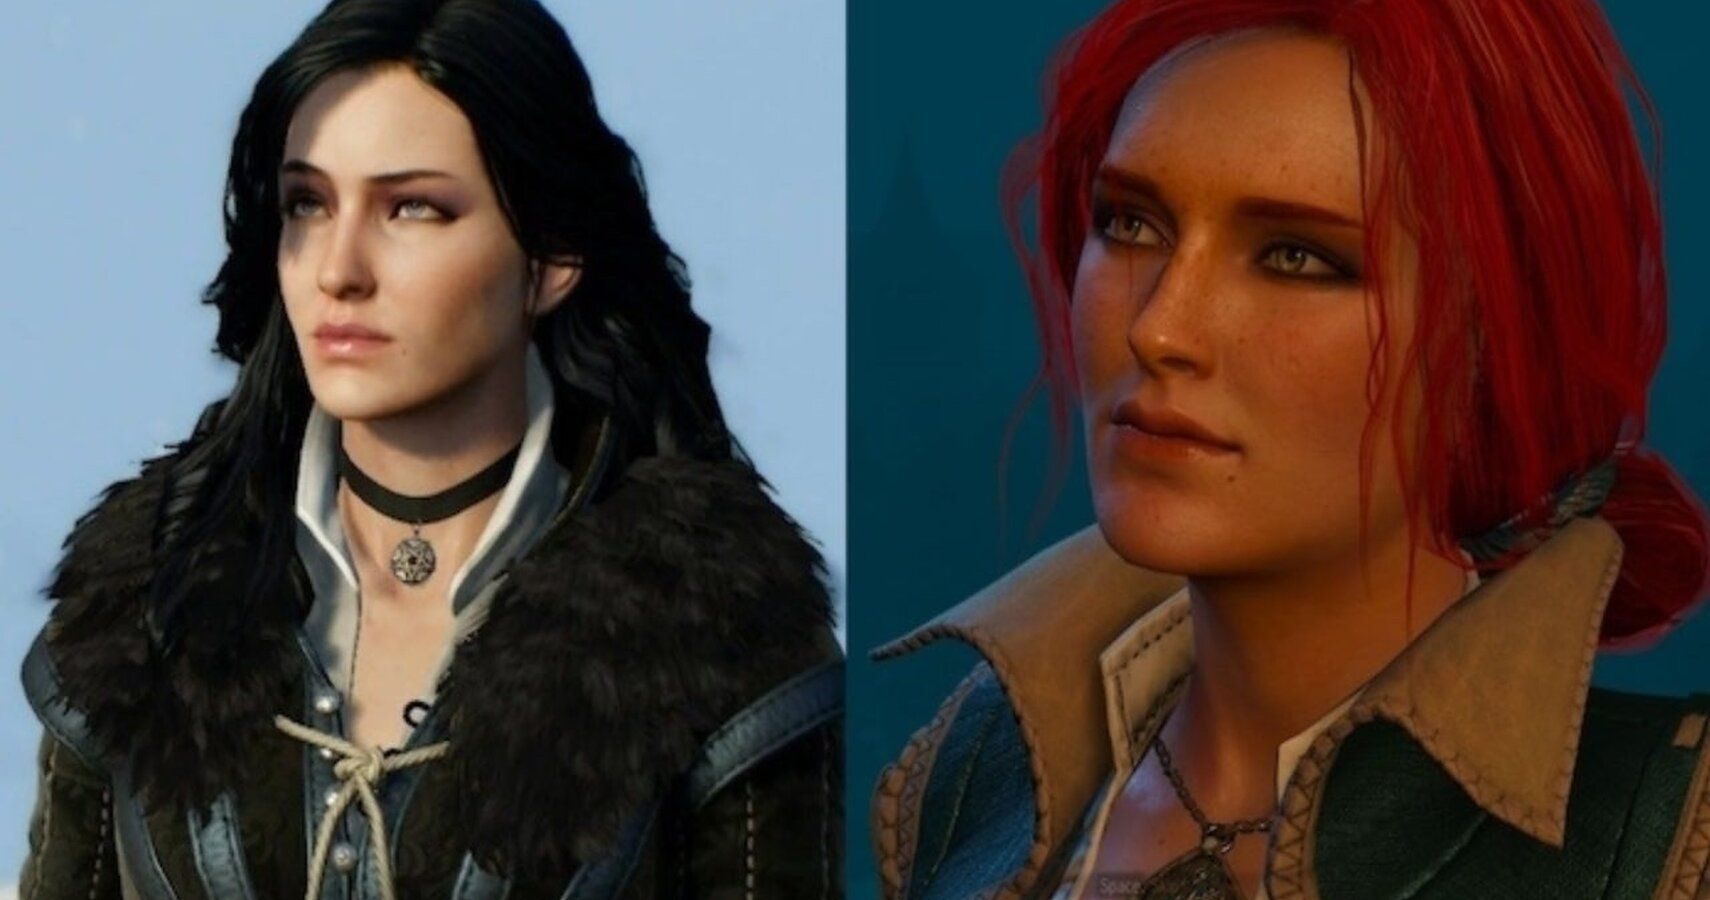 rsz-the-witcher-3-triss-yenneferv1-cropped-4939171